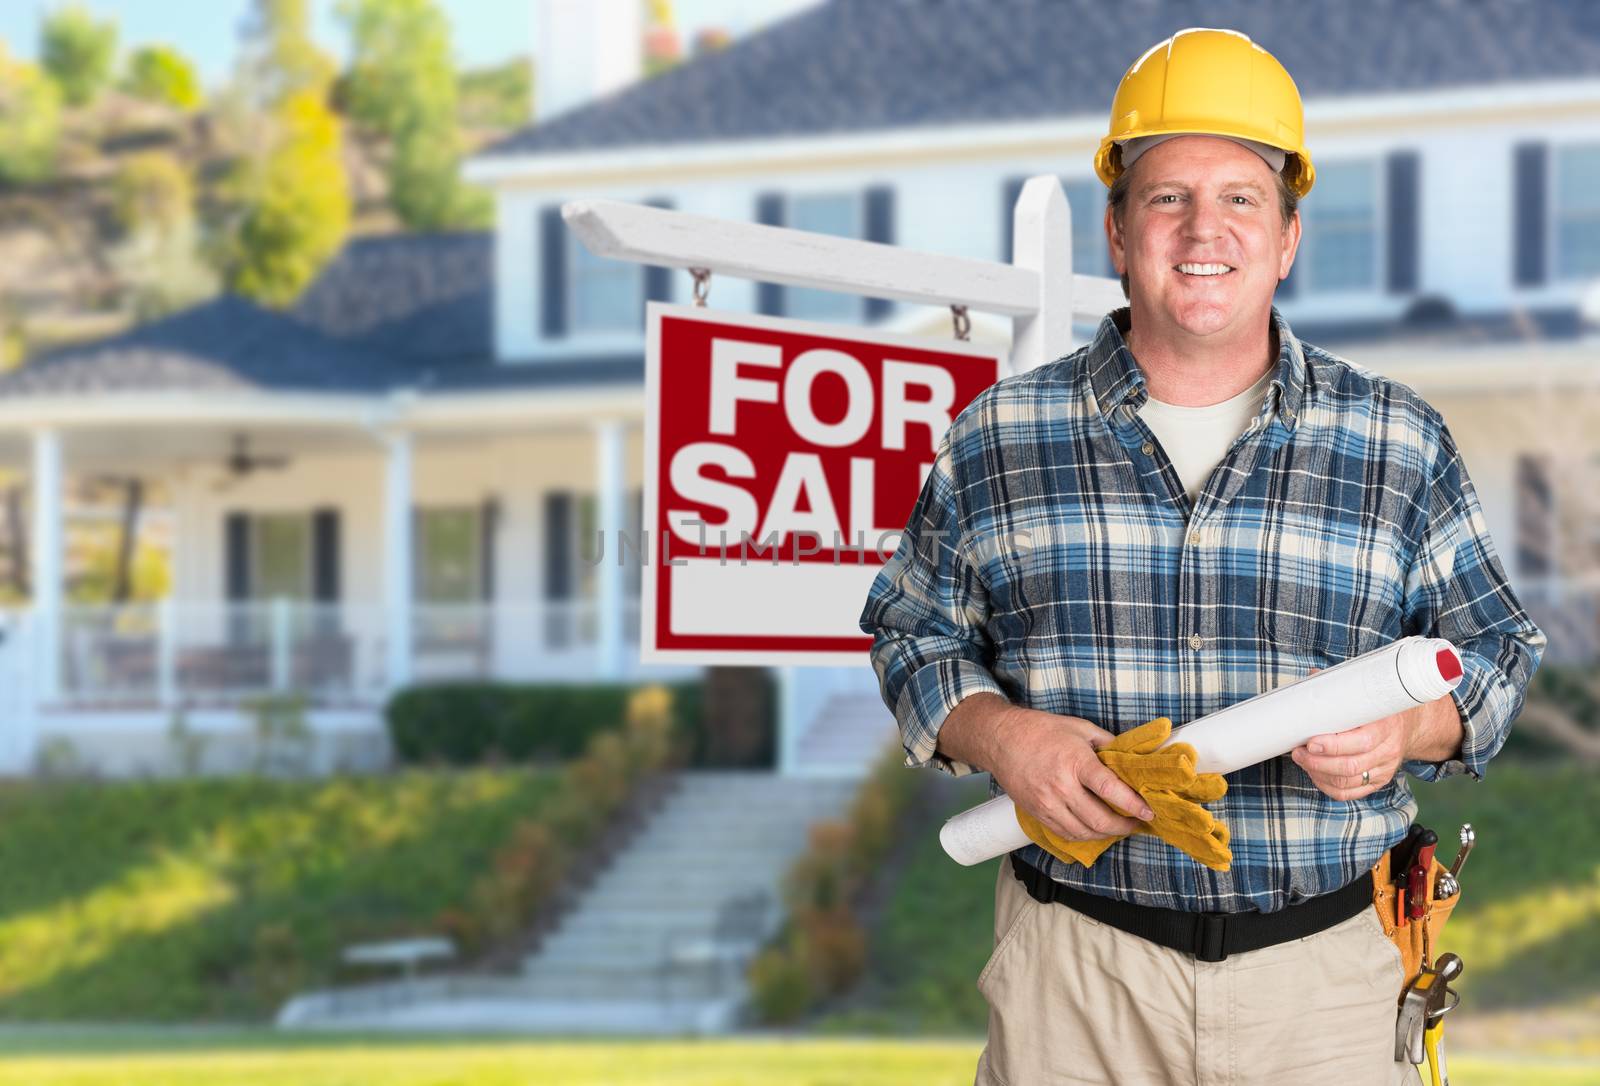 Contractor With Plans and Hard Hat In Front of For Sale Real Estate Sign and House. by Feverpitched